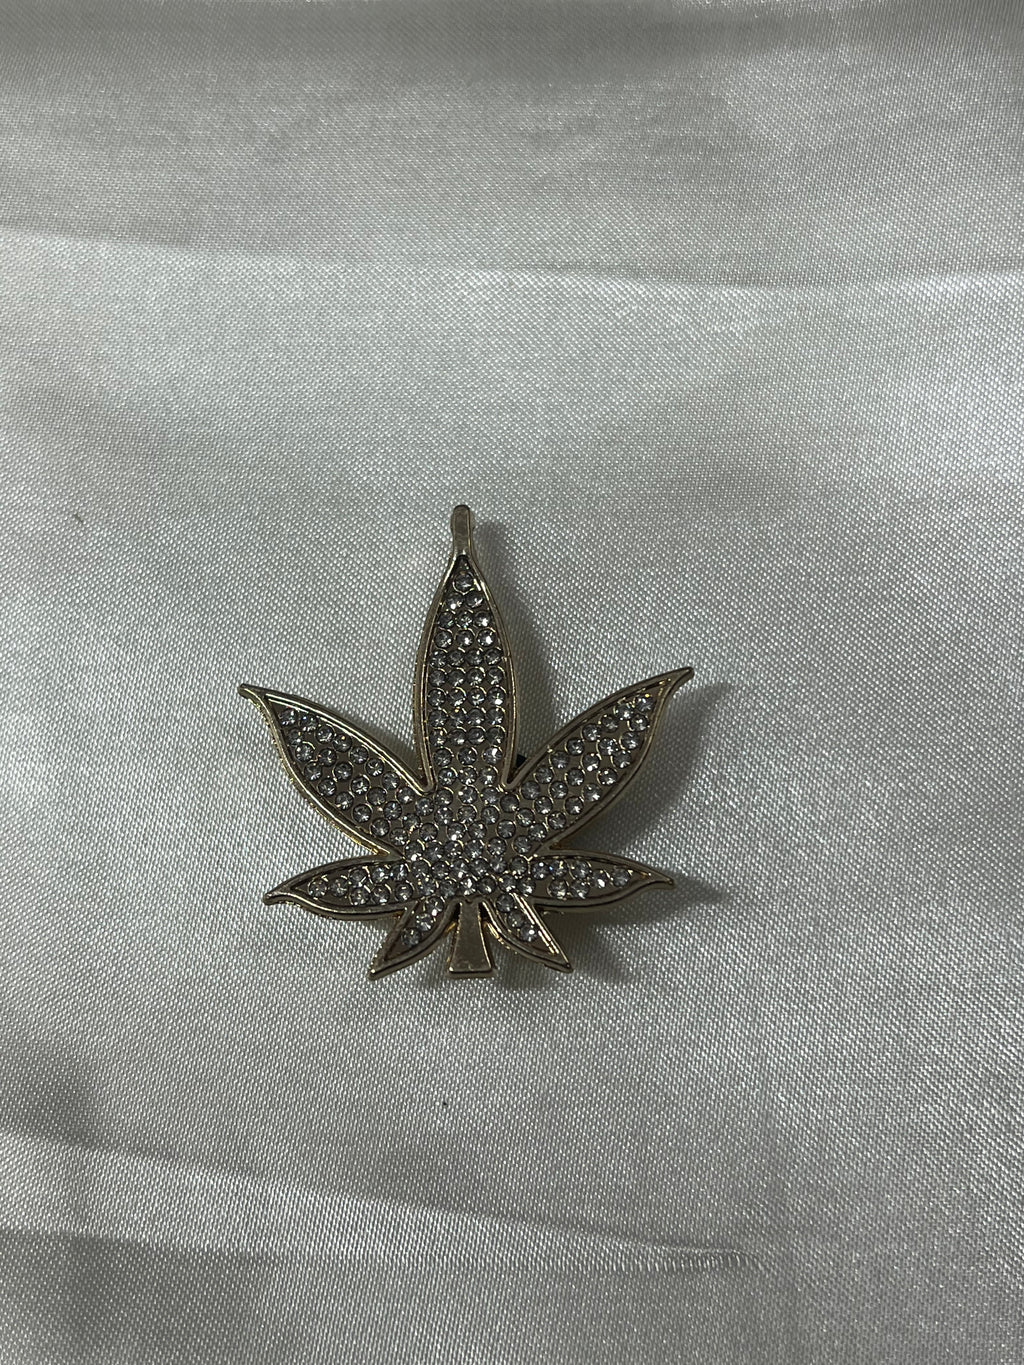 SILVER WEED